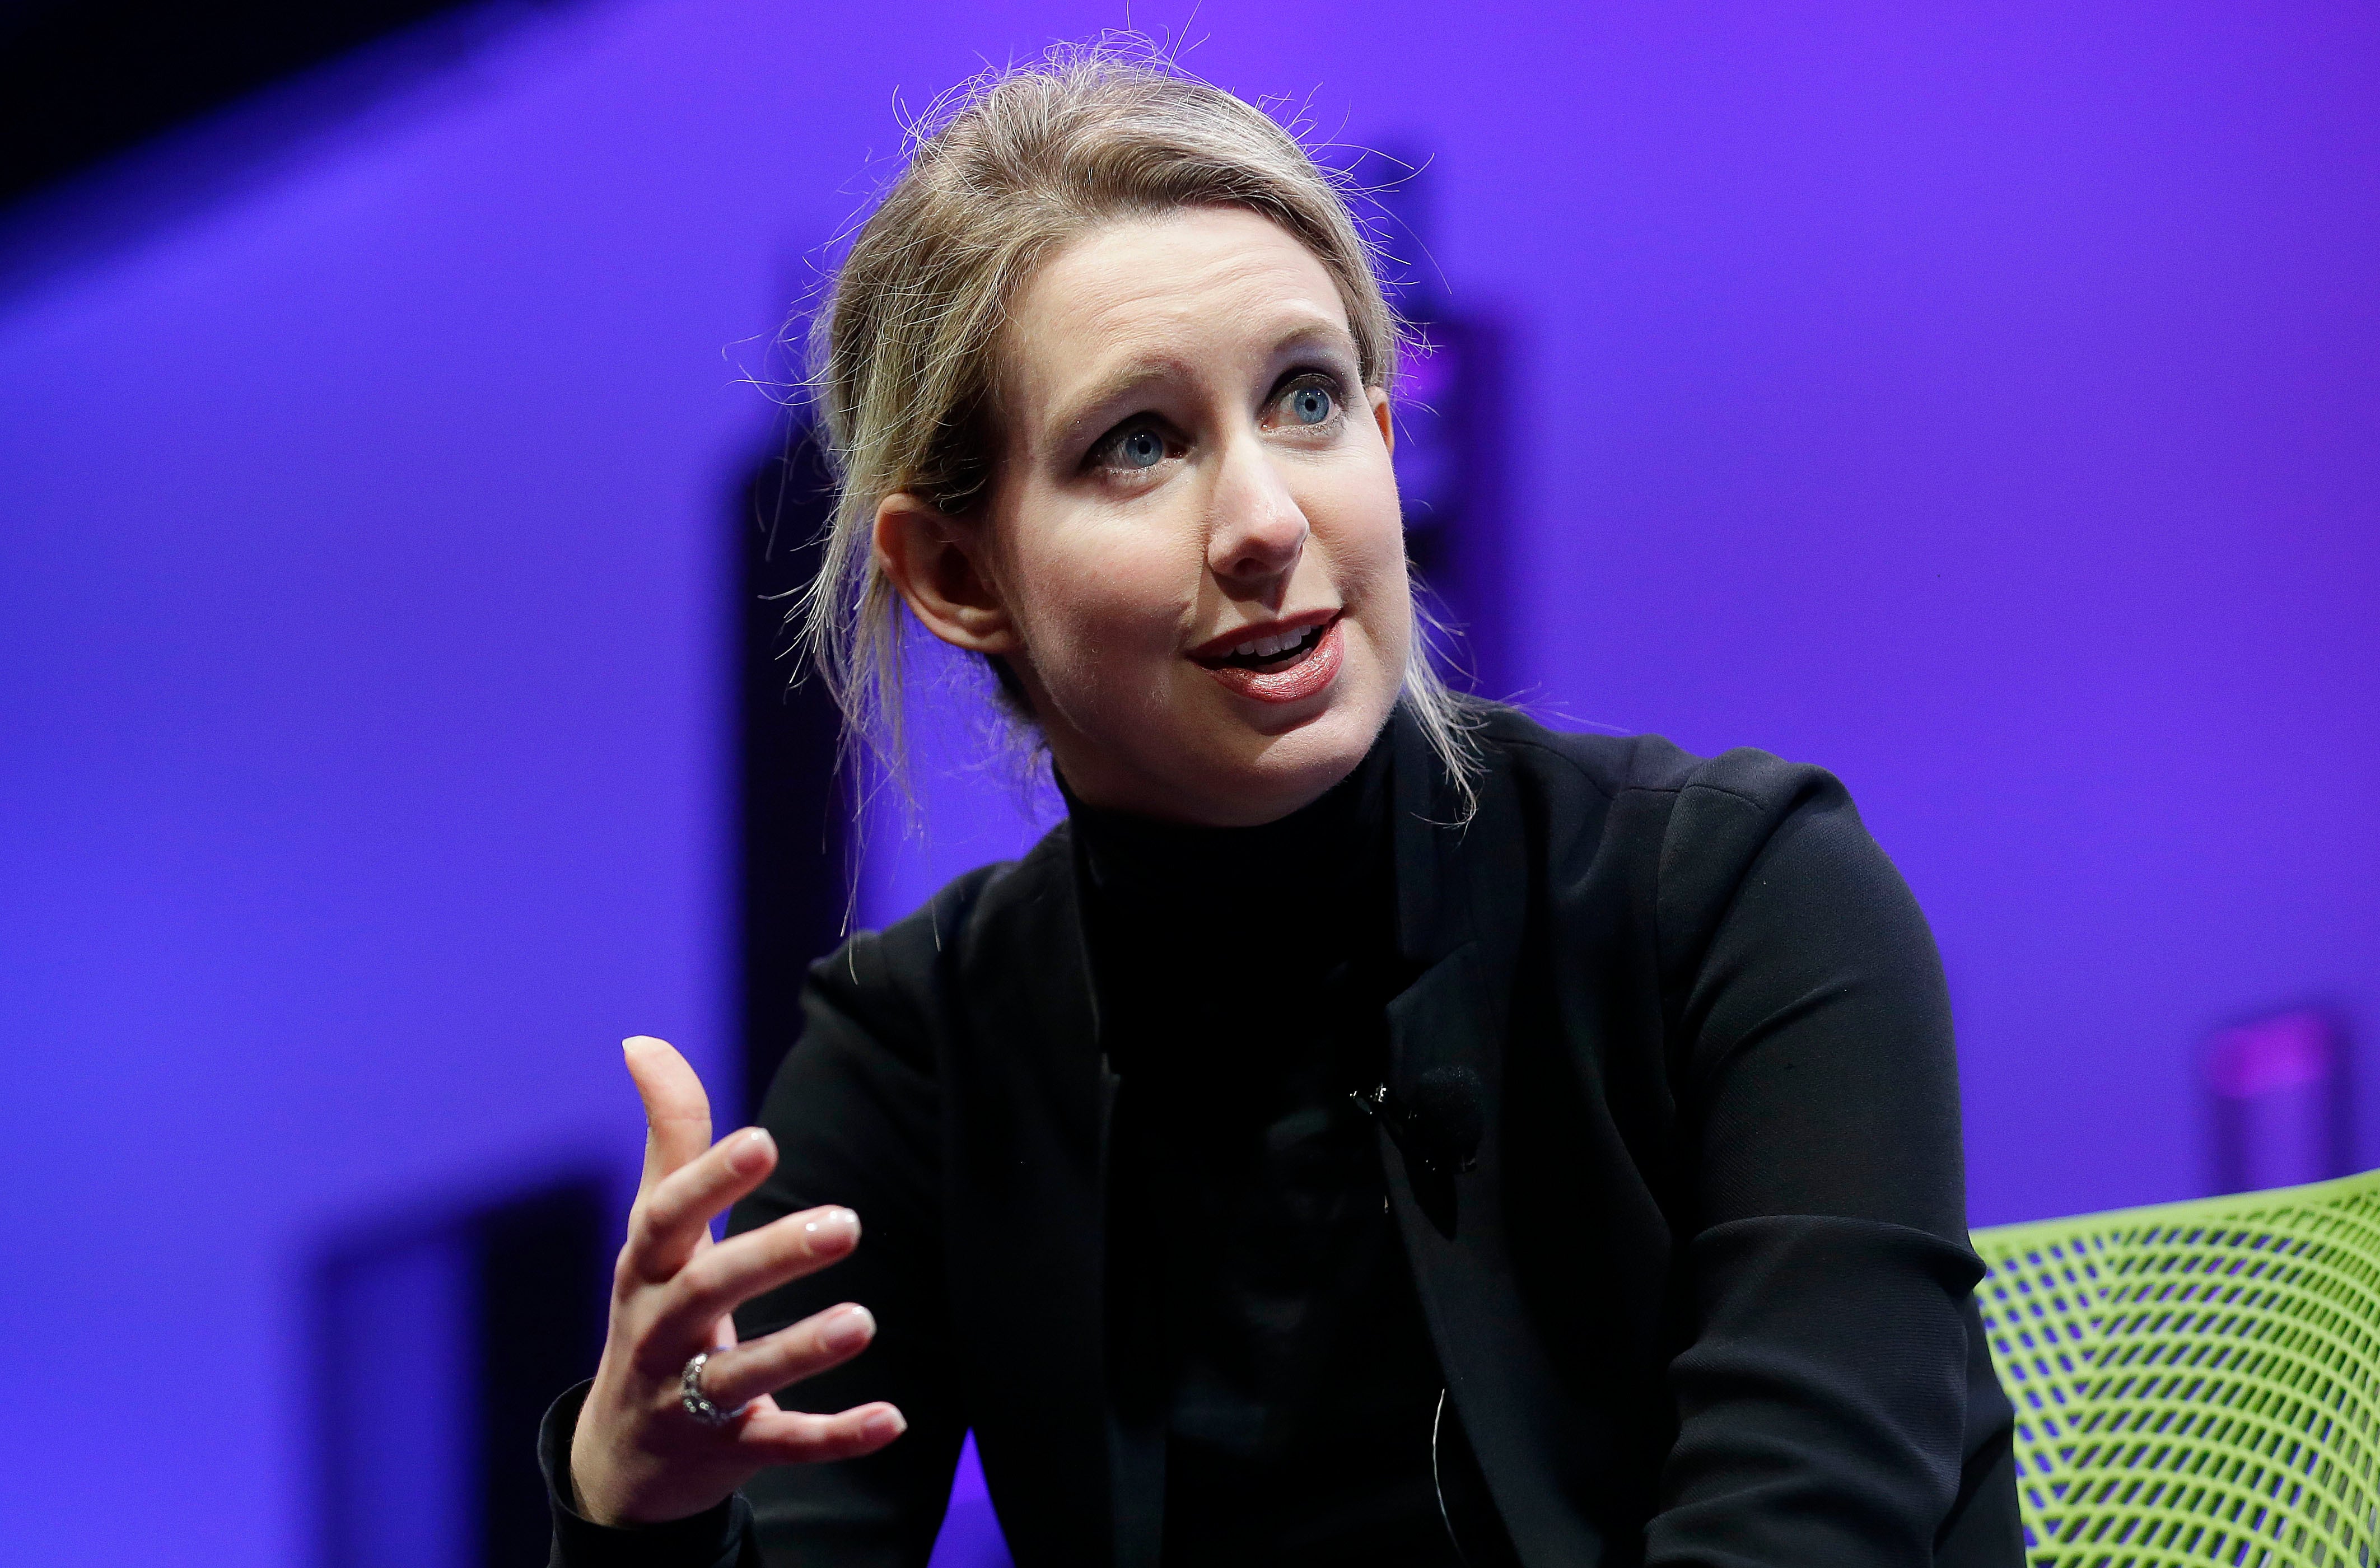 Elizabeth Holmes during her time as Theranos CEO